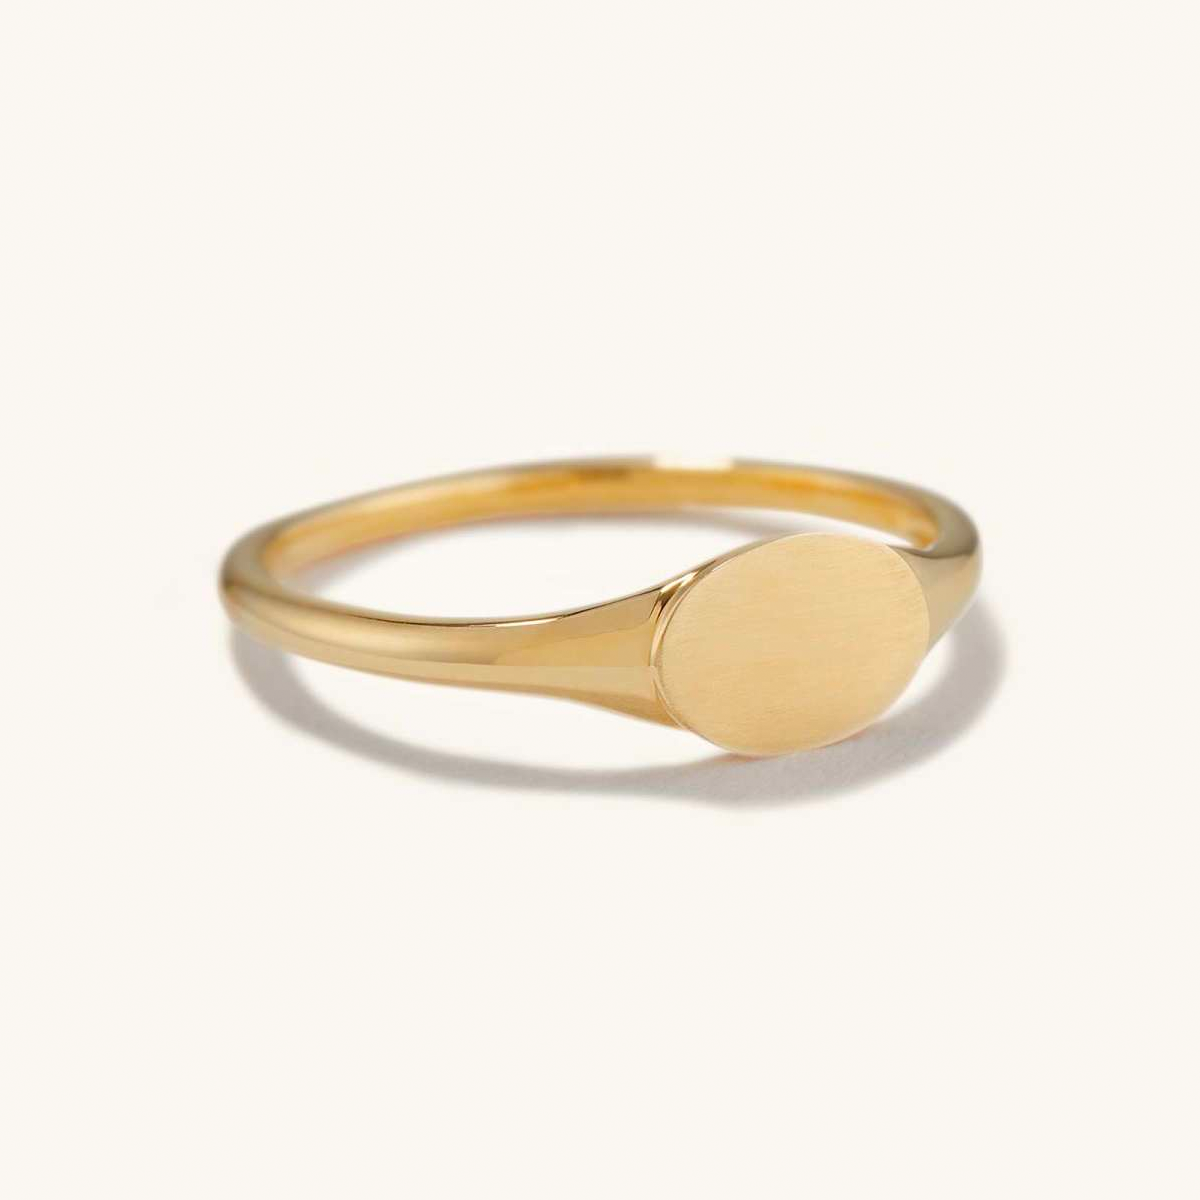 While traditional class rings might not be their thing, this elevated option from <a href="https://www.glamour.com/story/best-affordable-jewelry-brands?mbid=synd_msn_rss&utm_source=msn&utm_medium=syndication">affordable jewelry brand</a> Mejuri is another story. Plus, you can get it engraved with their initial. $198, Mejuri. <a href="https://mejuri.com/shop/products/signet-ring">Get it now!</a><p>Sign up for today’s biggest stories, from pop culture to politics.</p><a href="https://www.glamour.com/newsletter/news?sourceCode=msnsend">Sign Up</a>